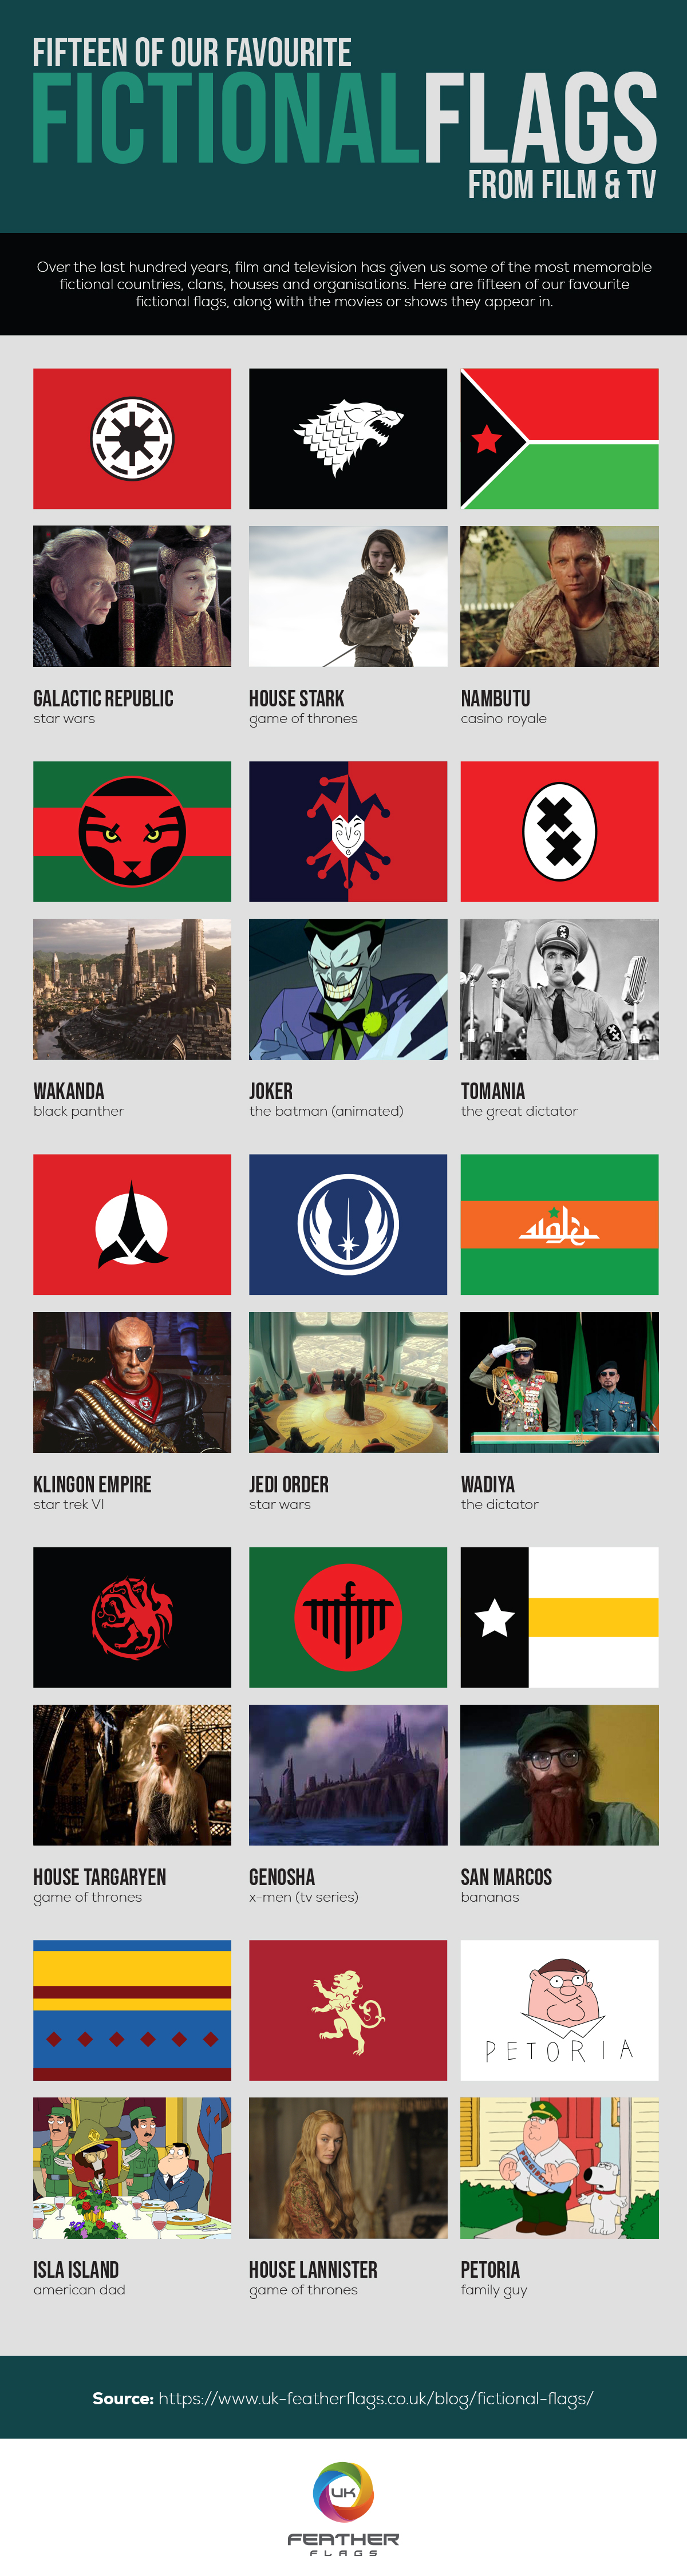 Fifteen Of Our Favourite Fictional Flags From Film & TV - Infographic